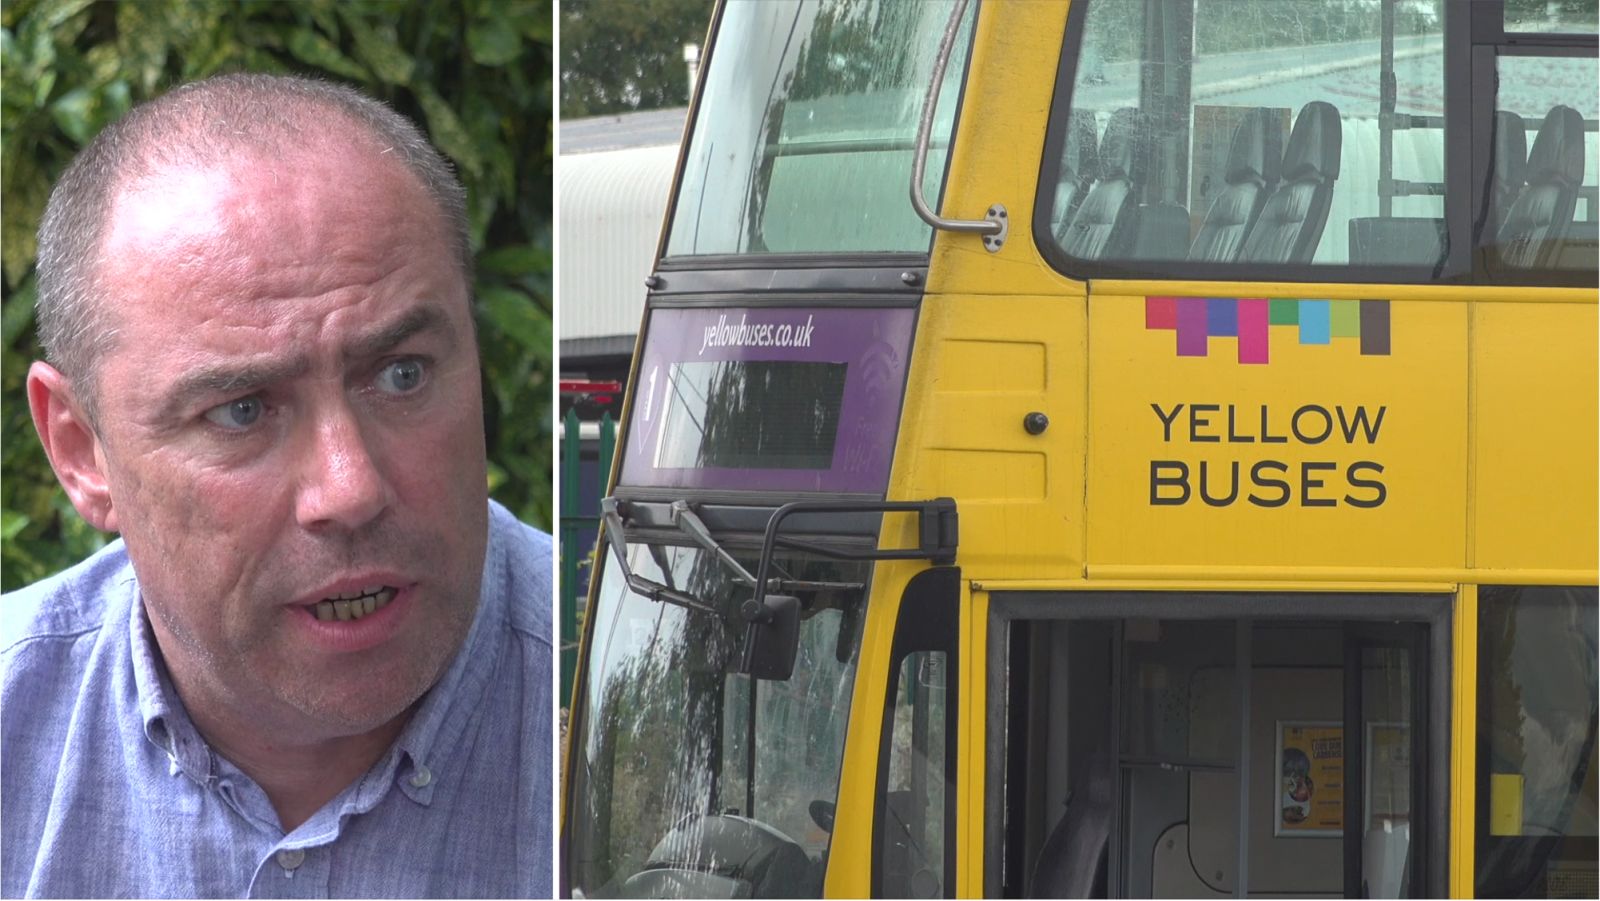 Shame On You Driver At Bournemouth S Iconic Yellow Buses Blasts Company Over Its Collapse